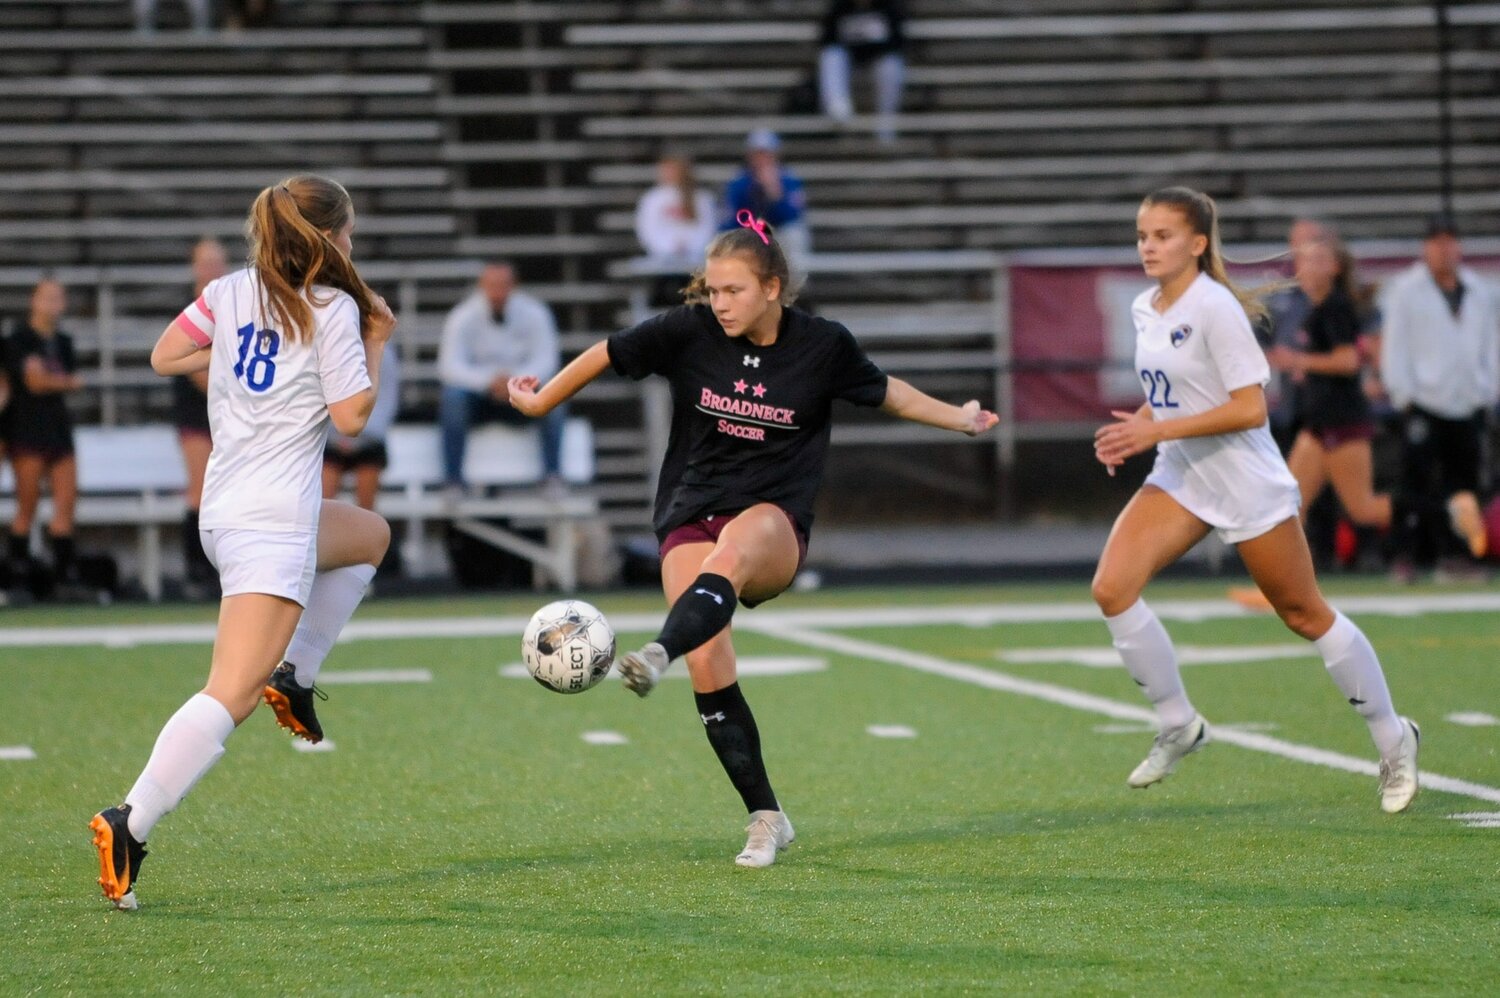 Maddie Capps controlled the ball.